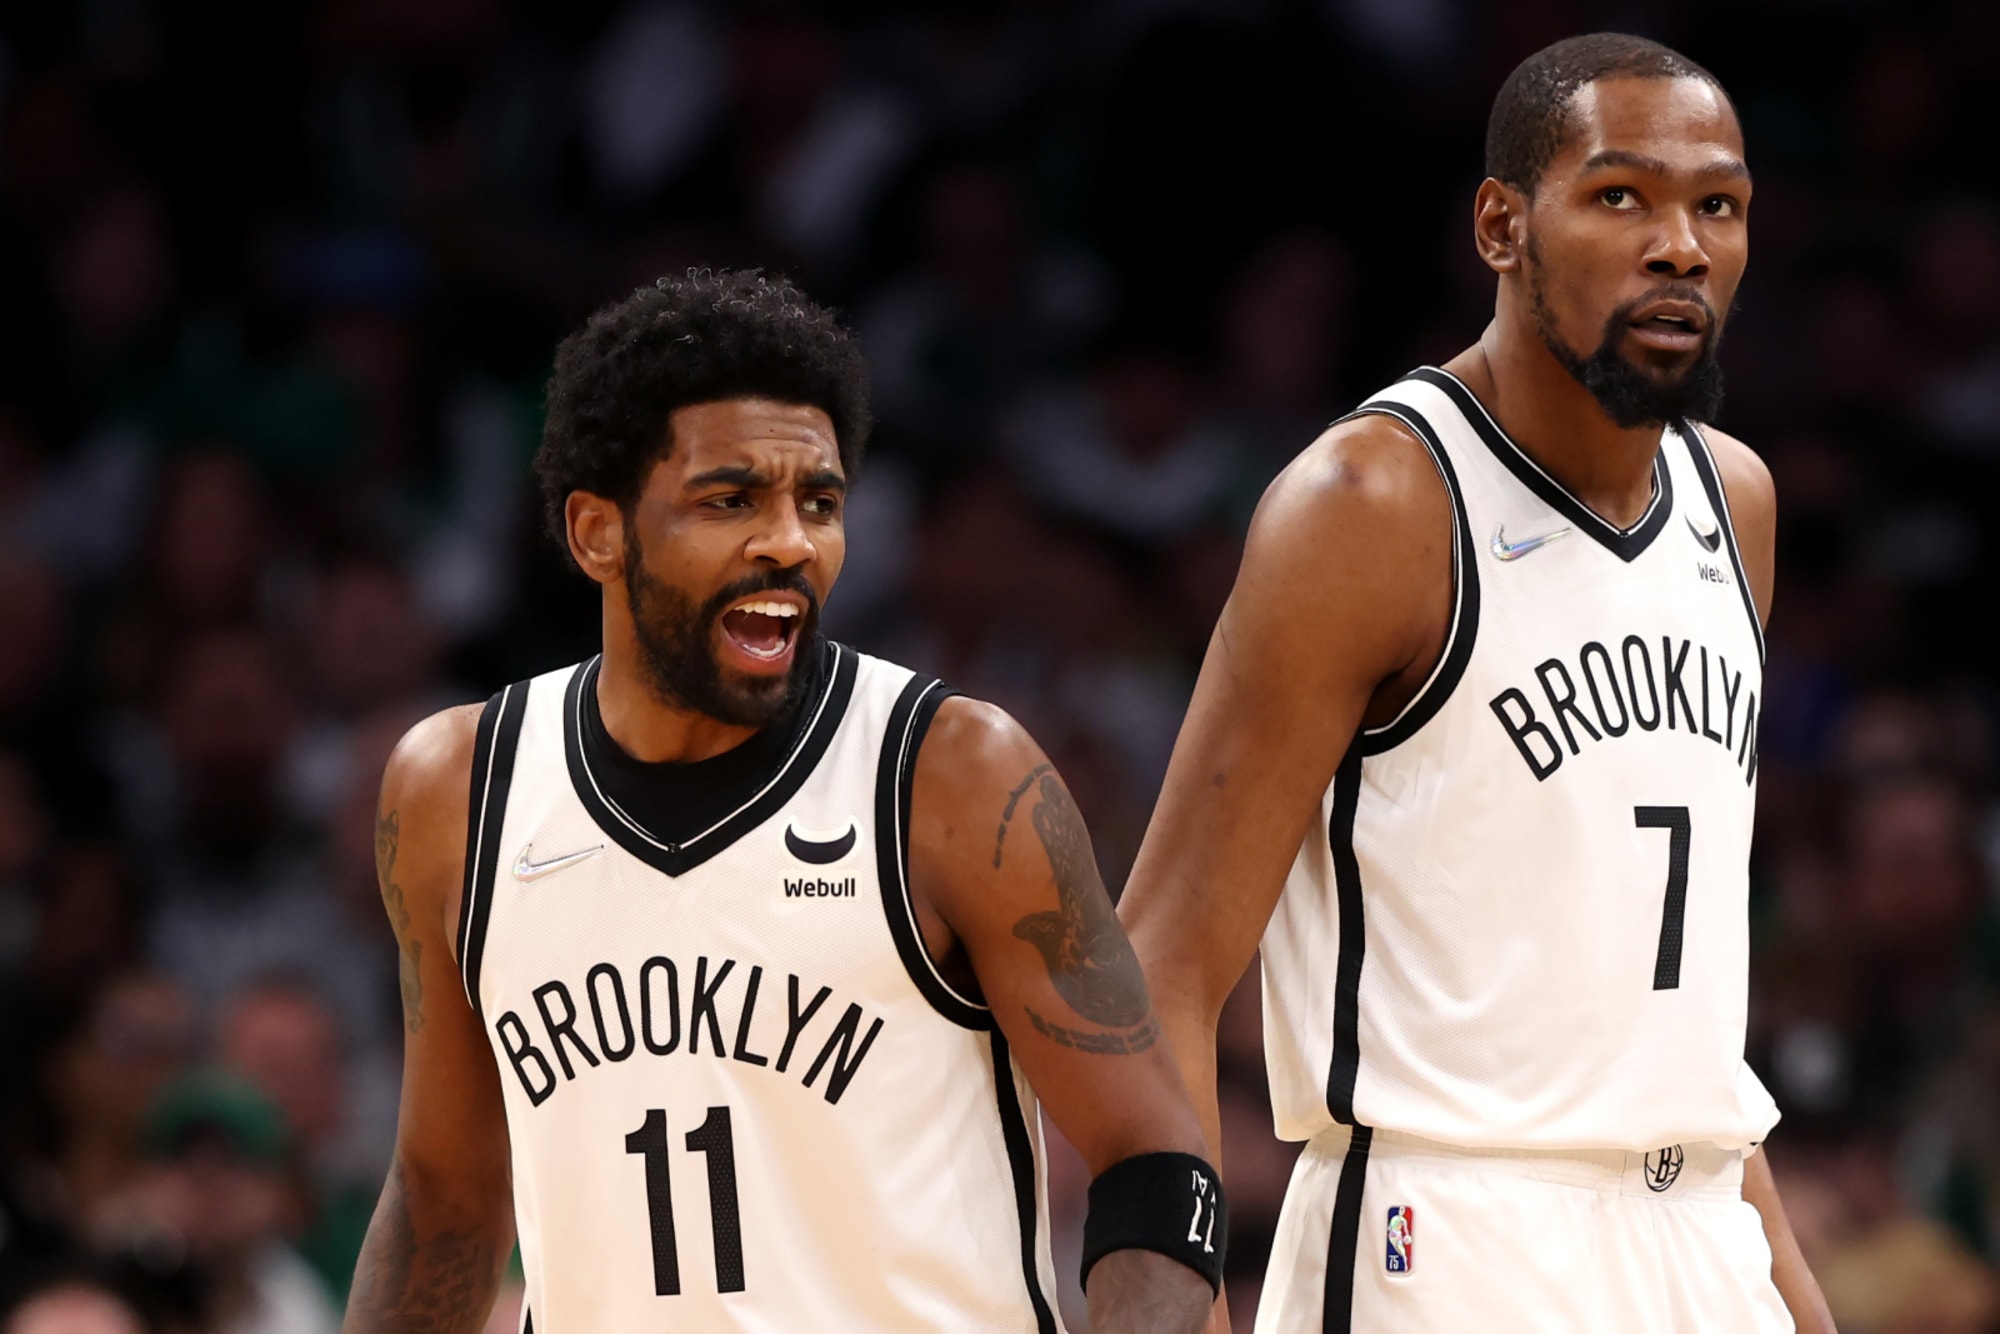 Kevin Durant and Kyrie Irving’s plan to avoid Knicks didn’t go as hoped